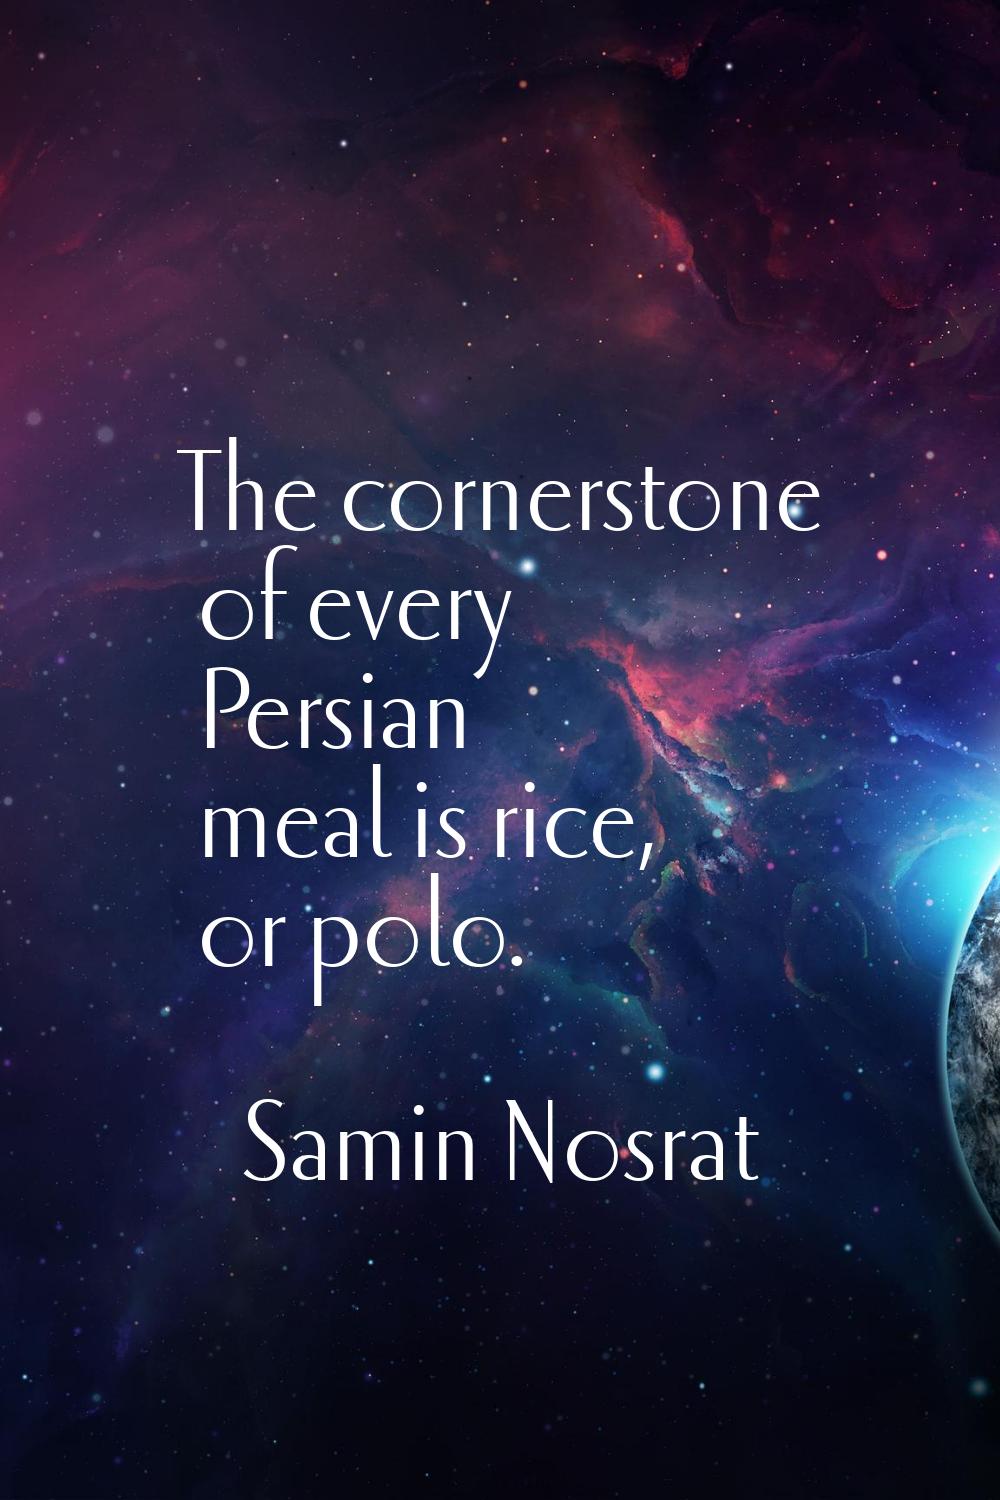 The cornerstone of every Persian meal is rice, or polo.